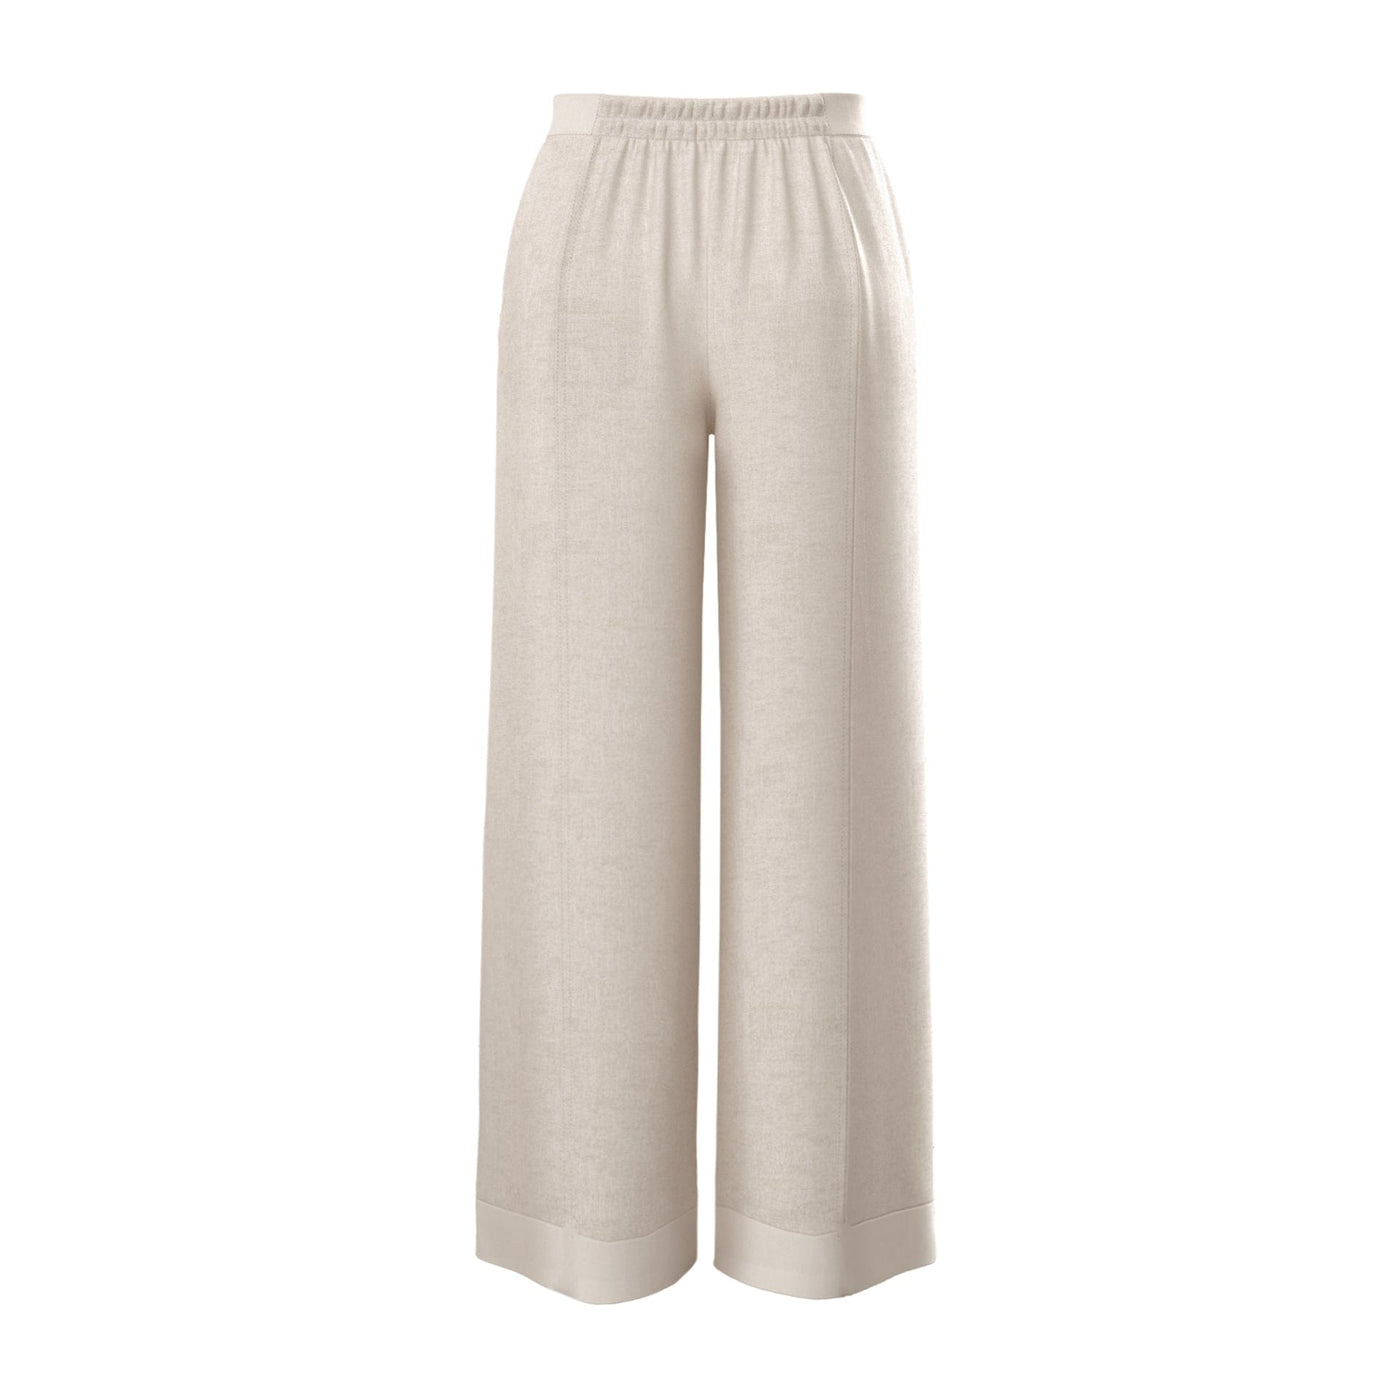 Lilly Pilly Collection Oli pants made from 100% Organic linen in Oatmeal, as 3D model showing back view